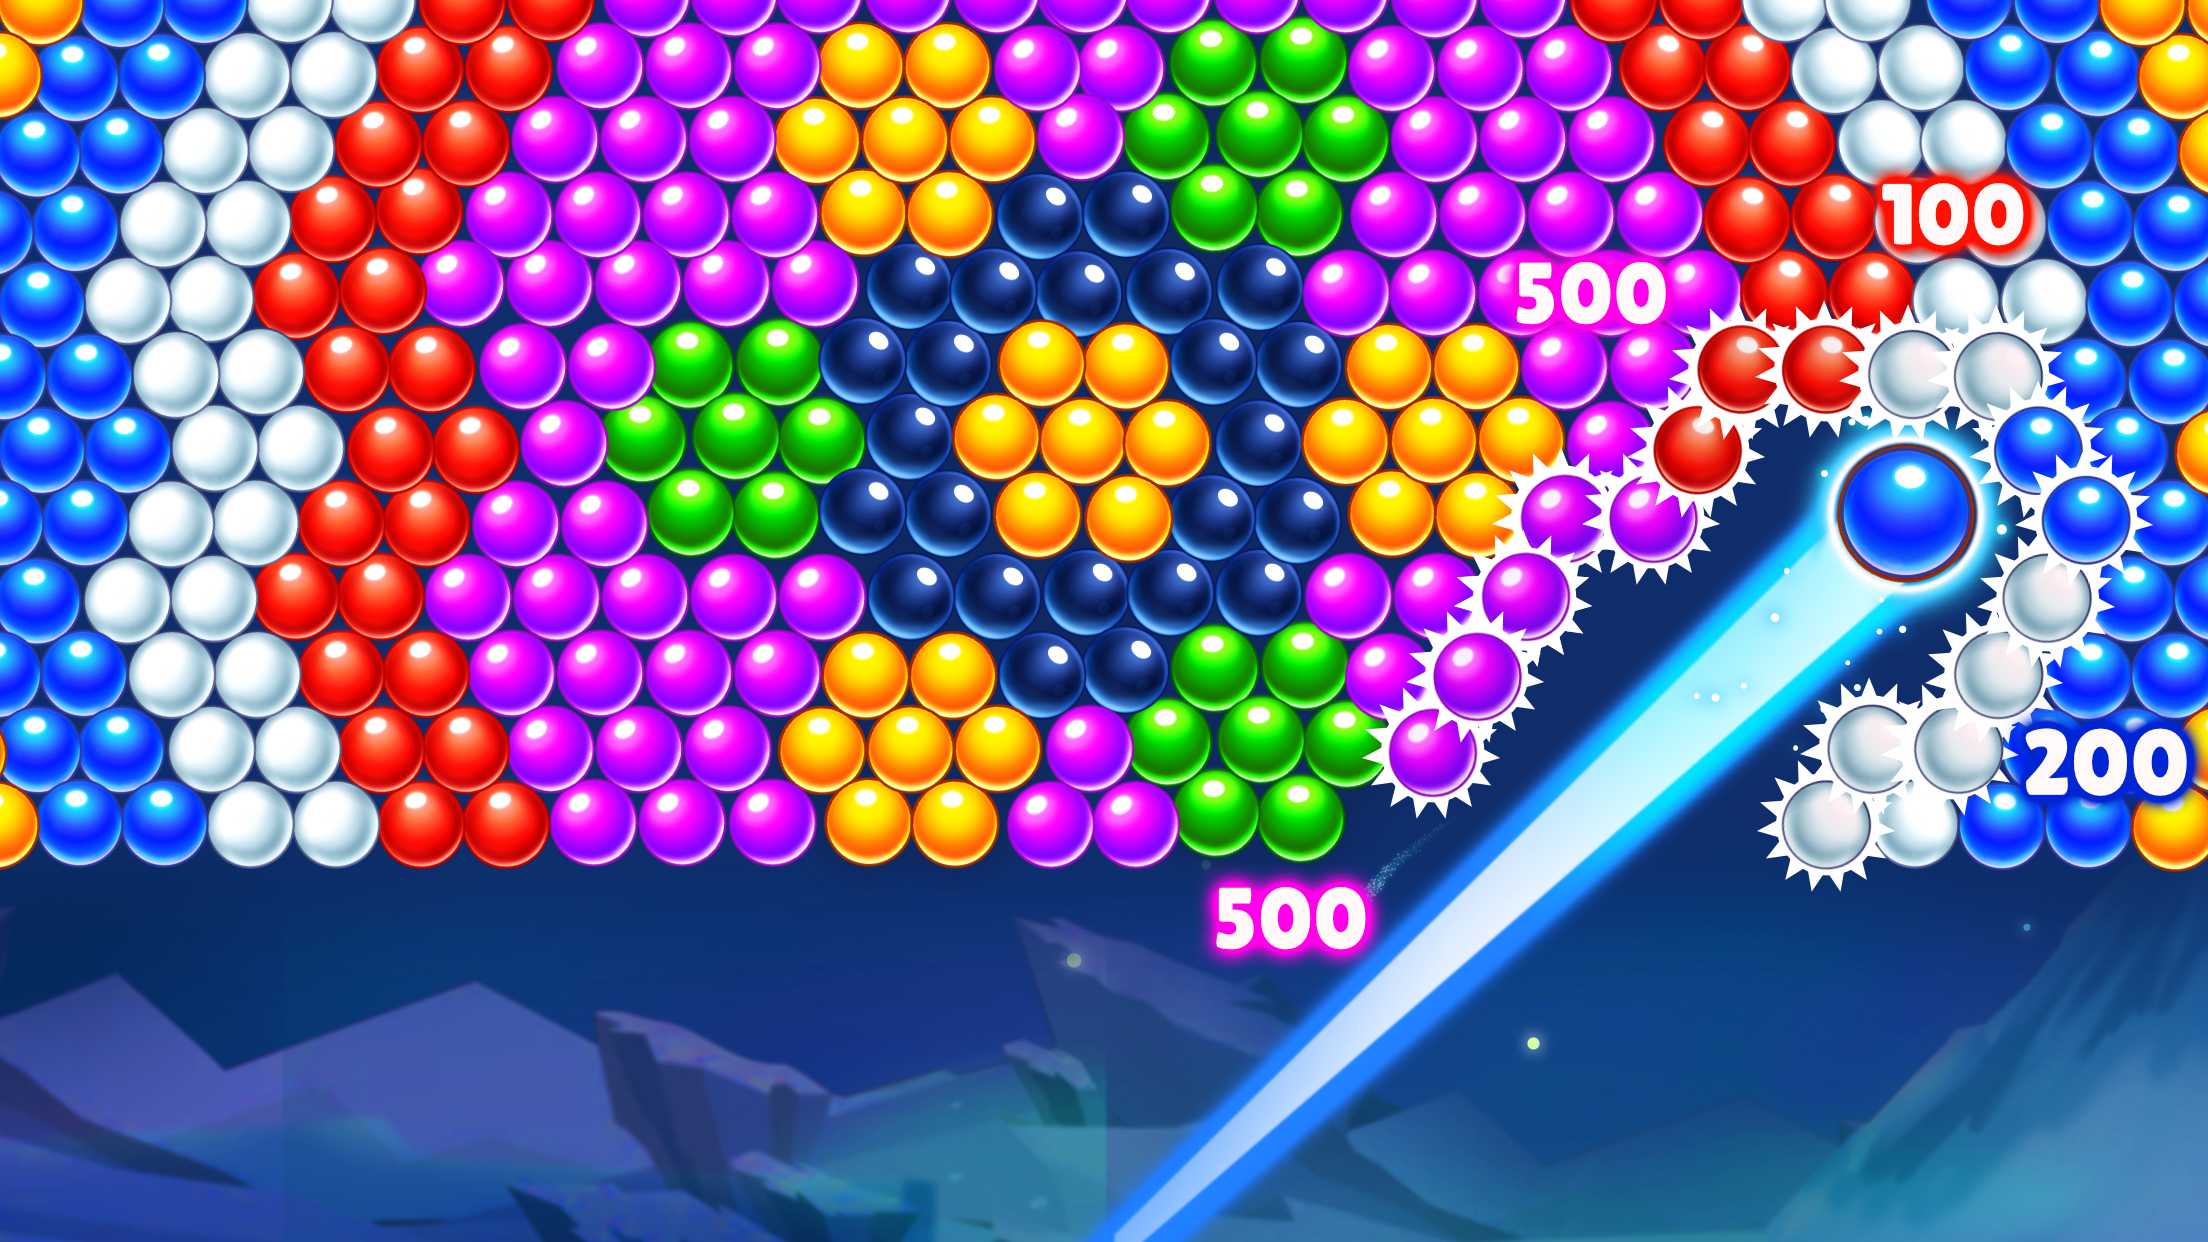 Bubble Shooter 3 for Android - Download the APK from Uptodown